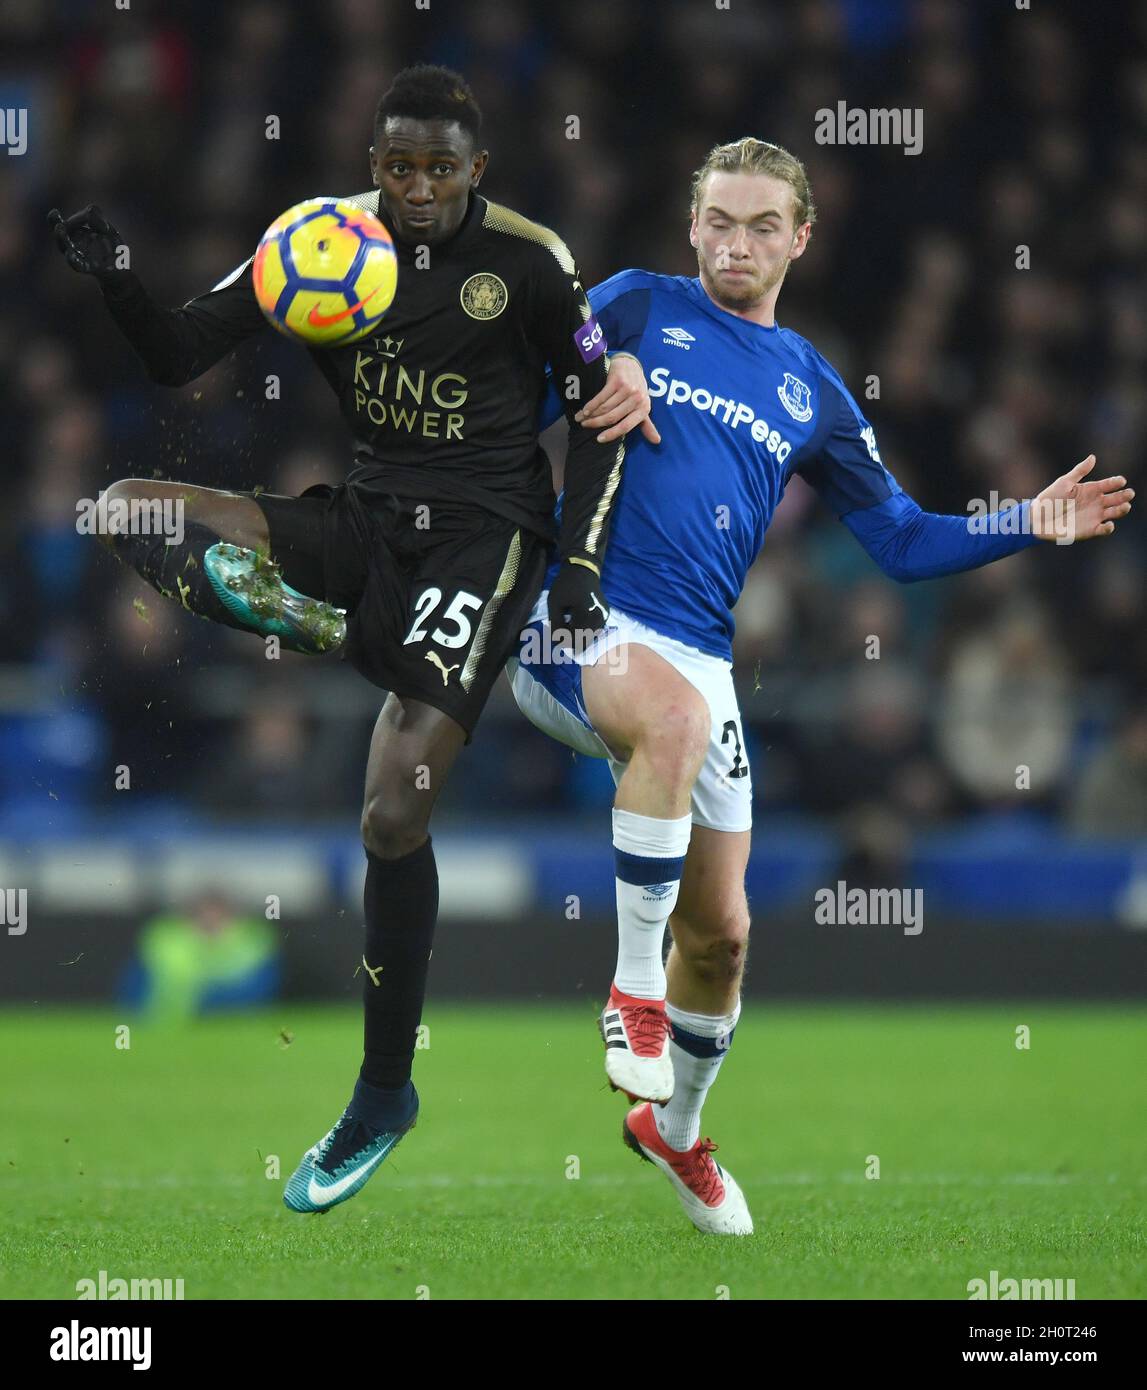 Leicester City's Wilfred Ndidi and Everton's Tom Davies compete for possession Stock Photo